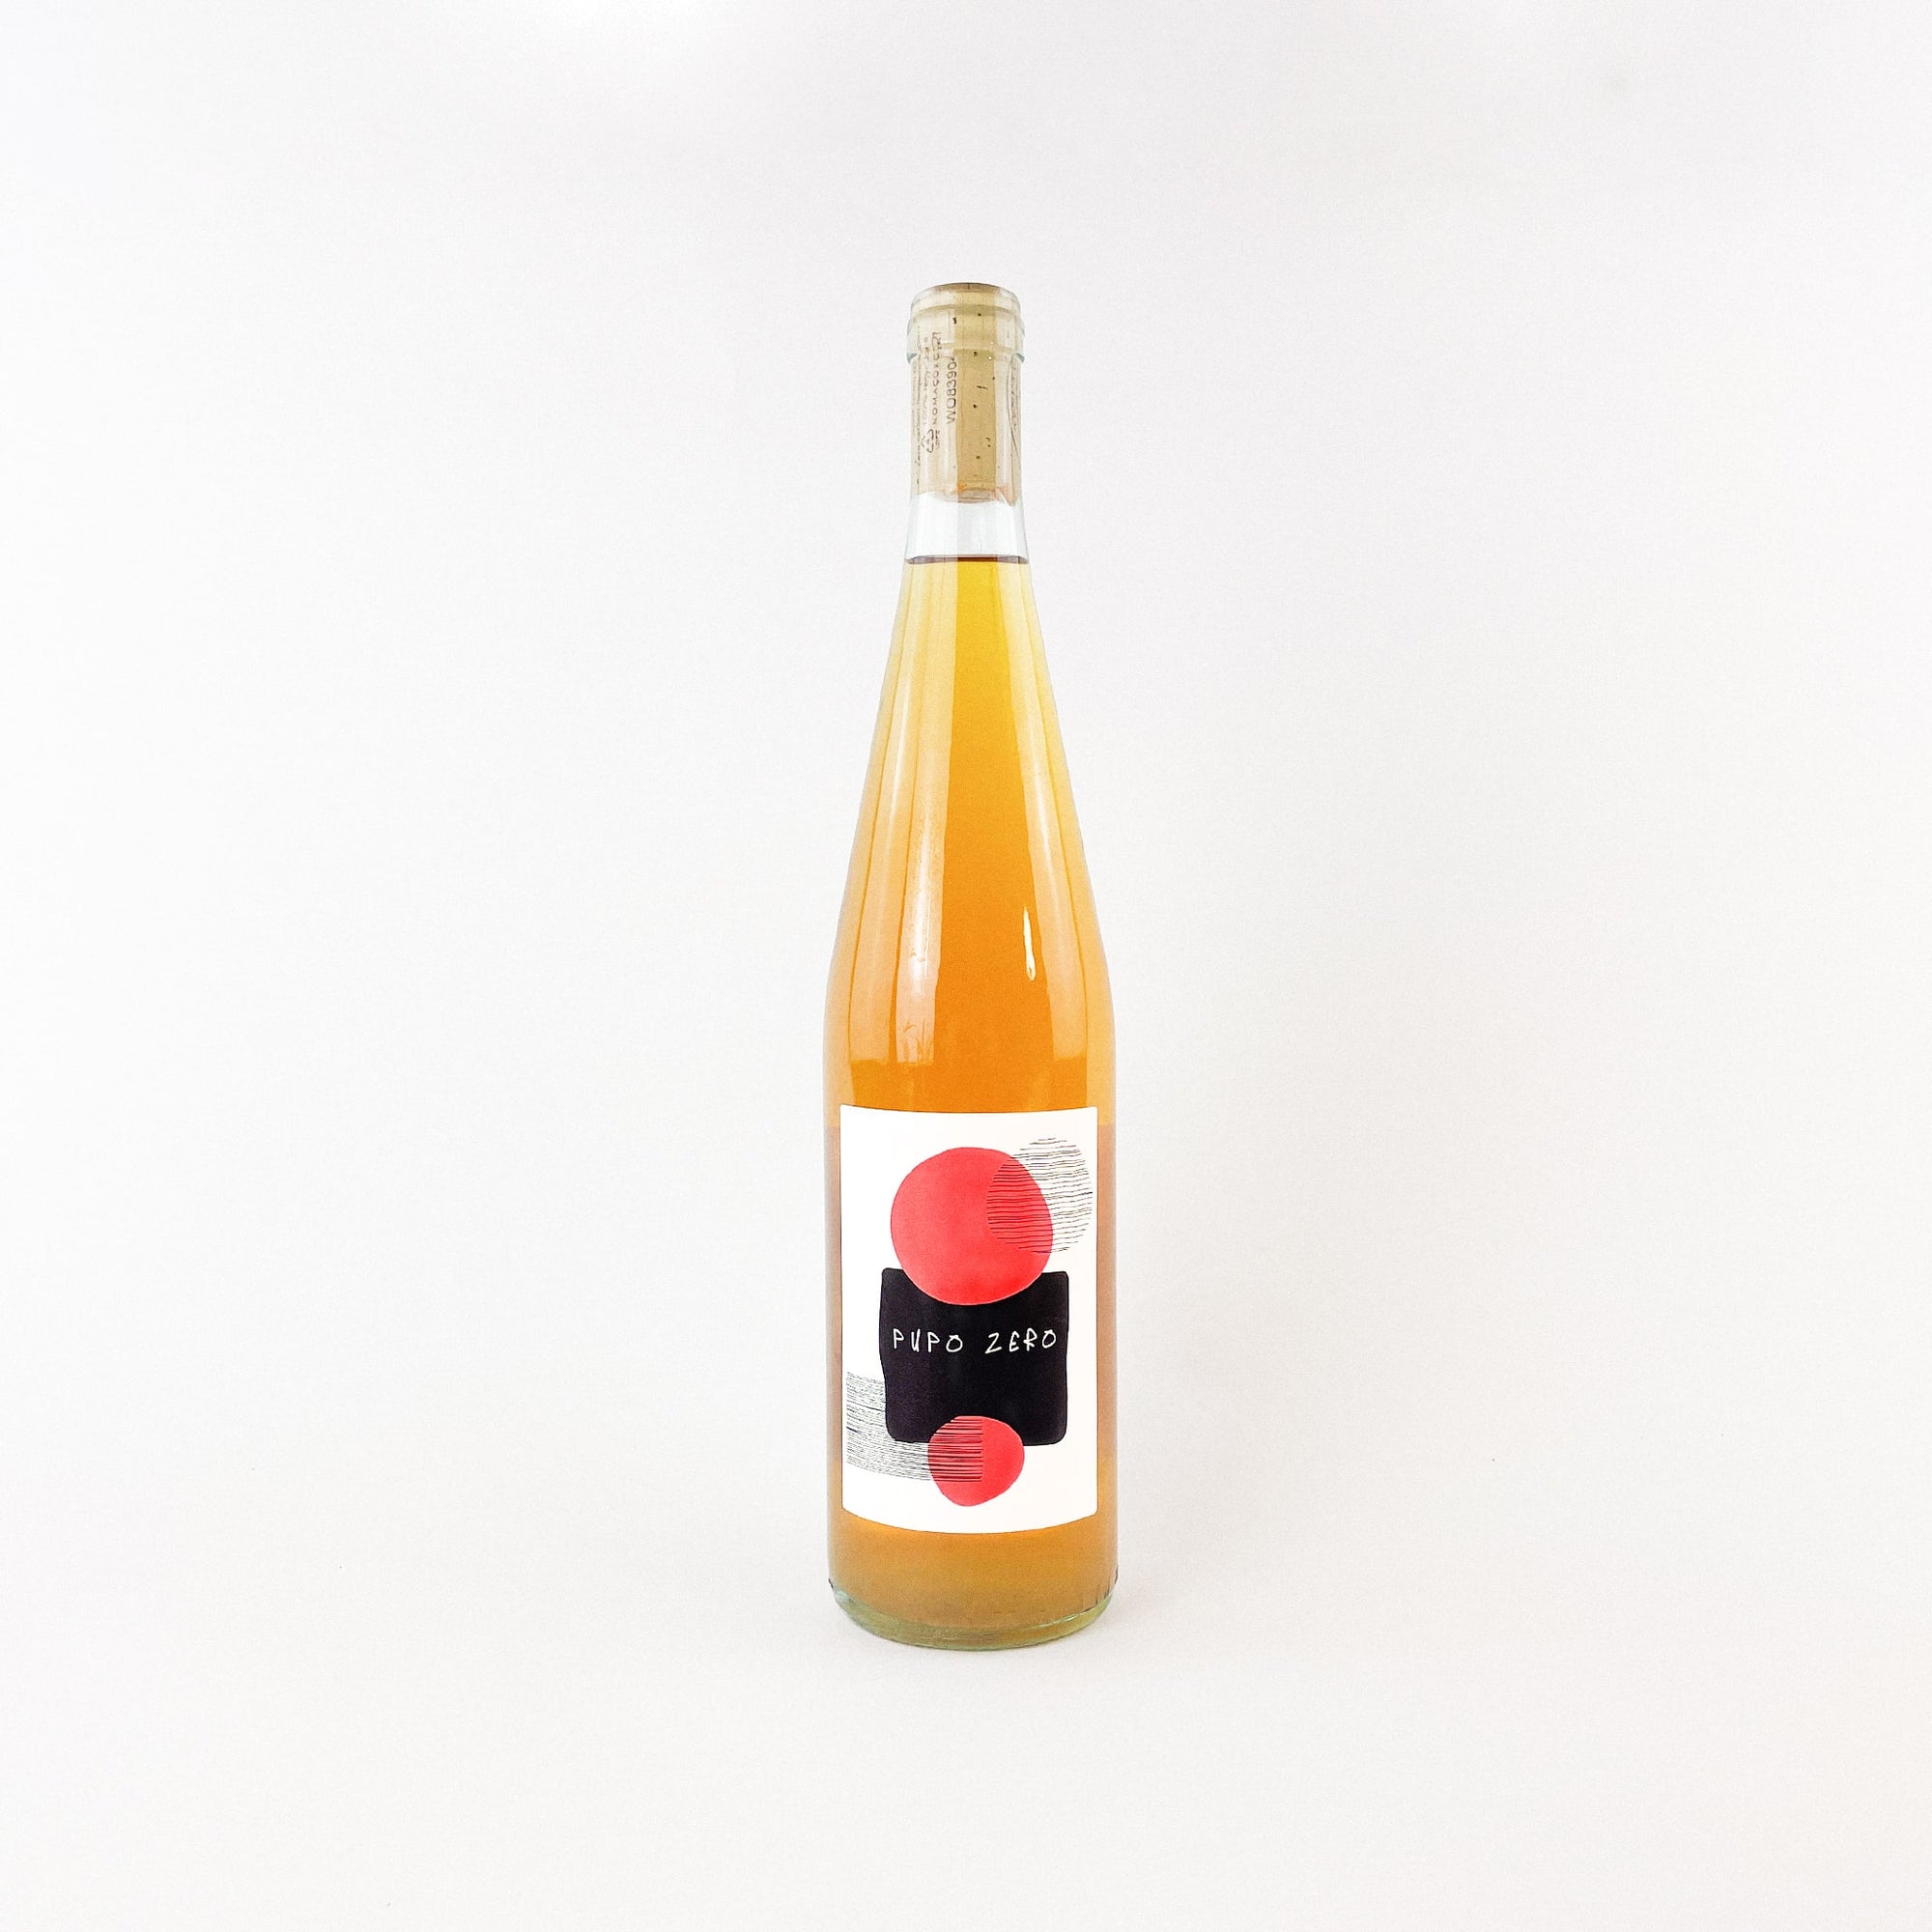 A bottle of orange natural wine from Italy - Pupo Zero Greco by Tenuta Nardone Front View